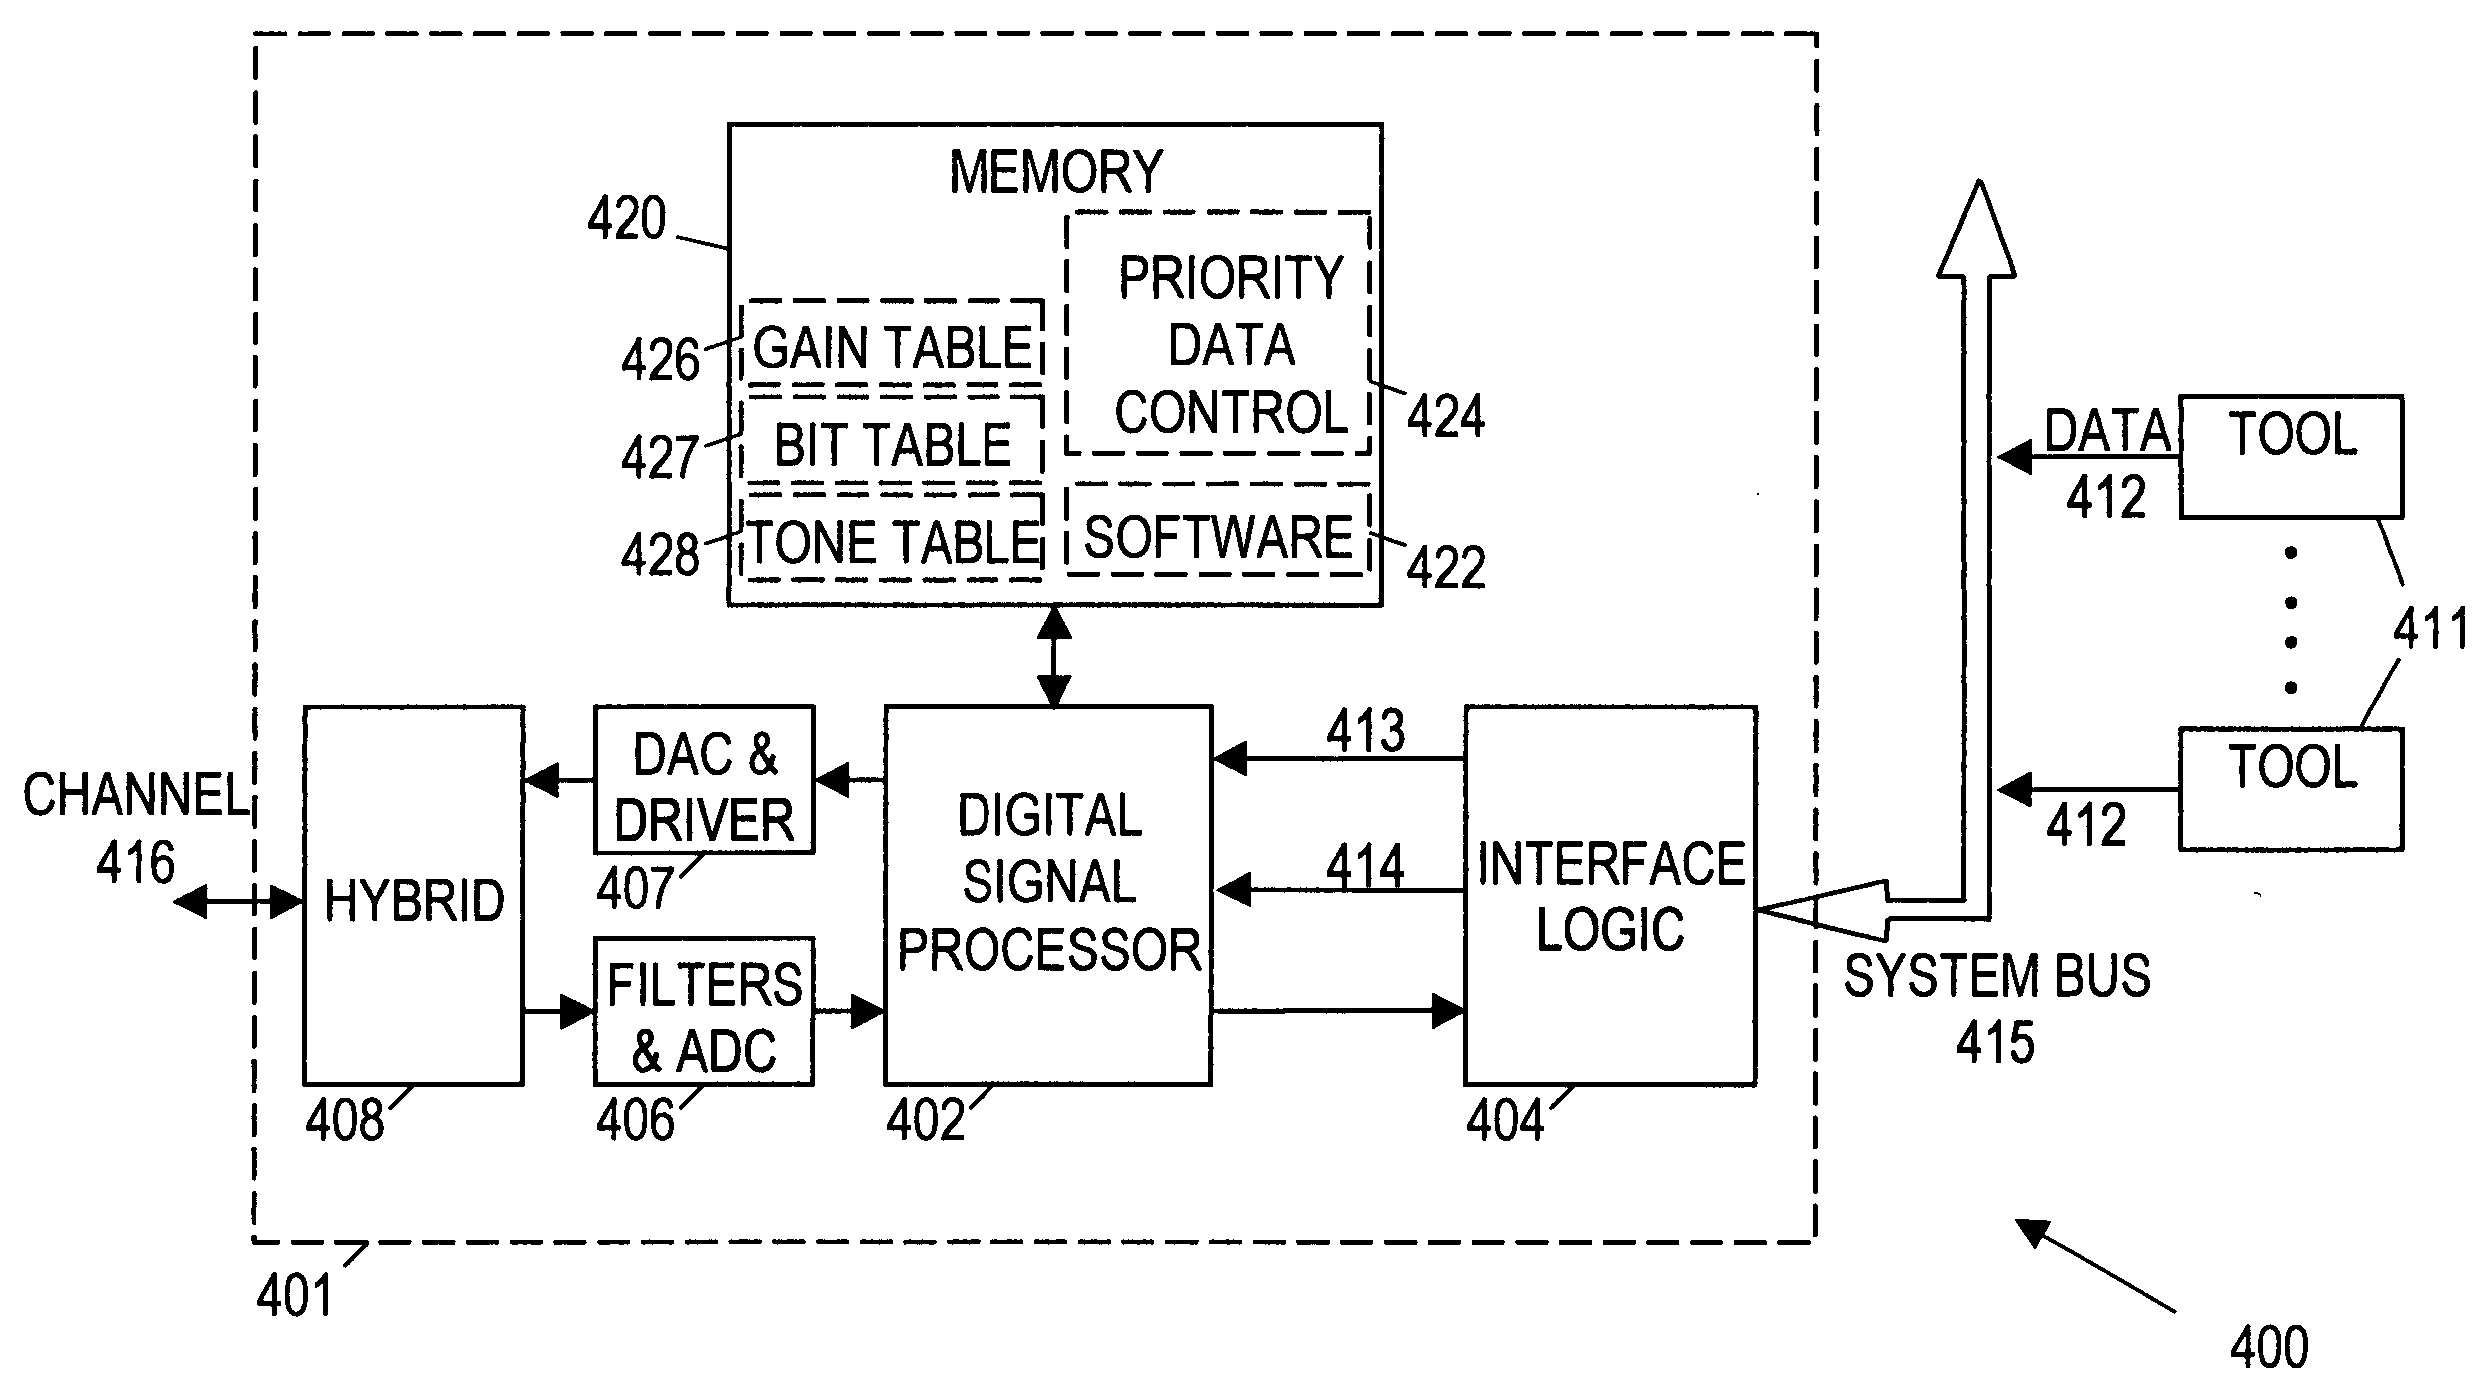 Priority data transmission in a wireline telemetry system